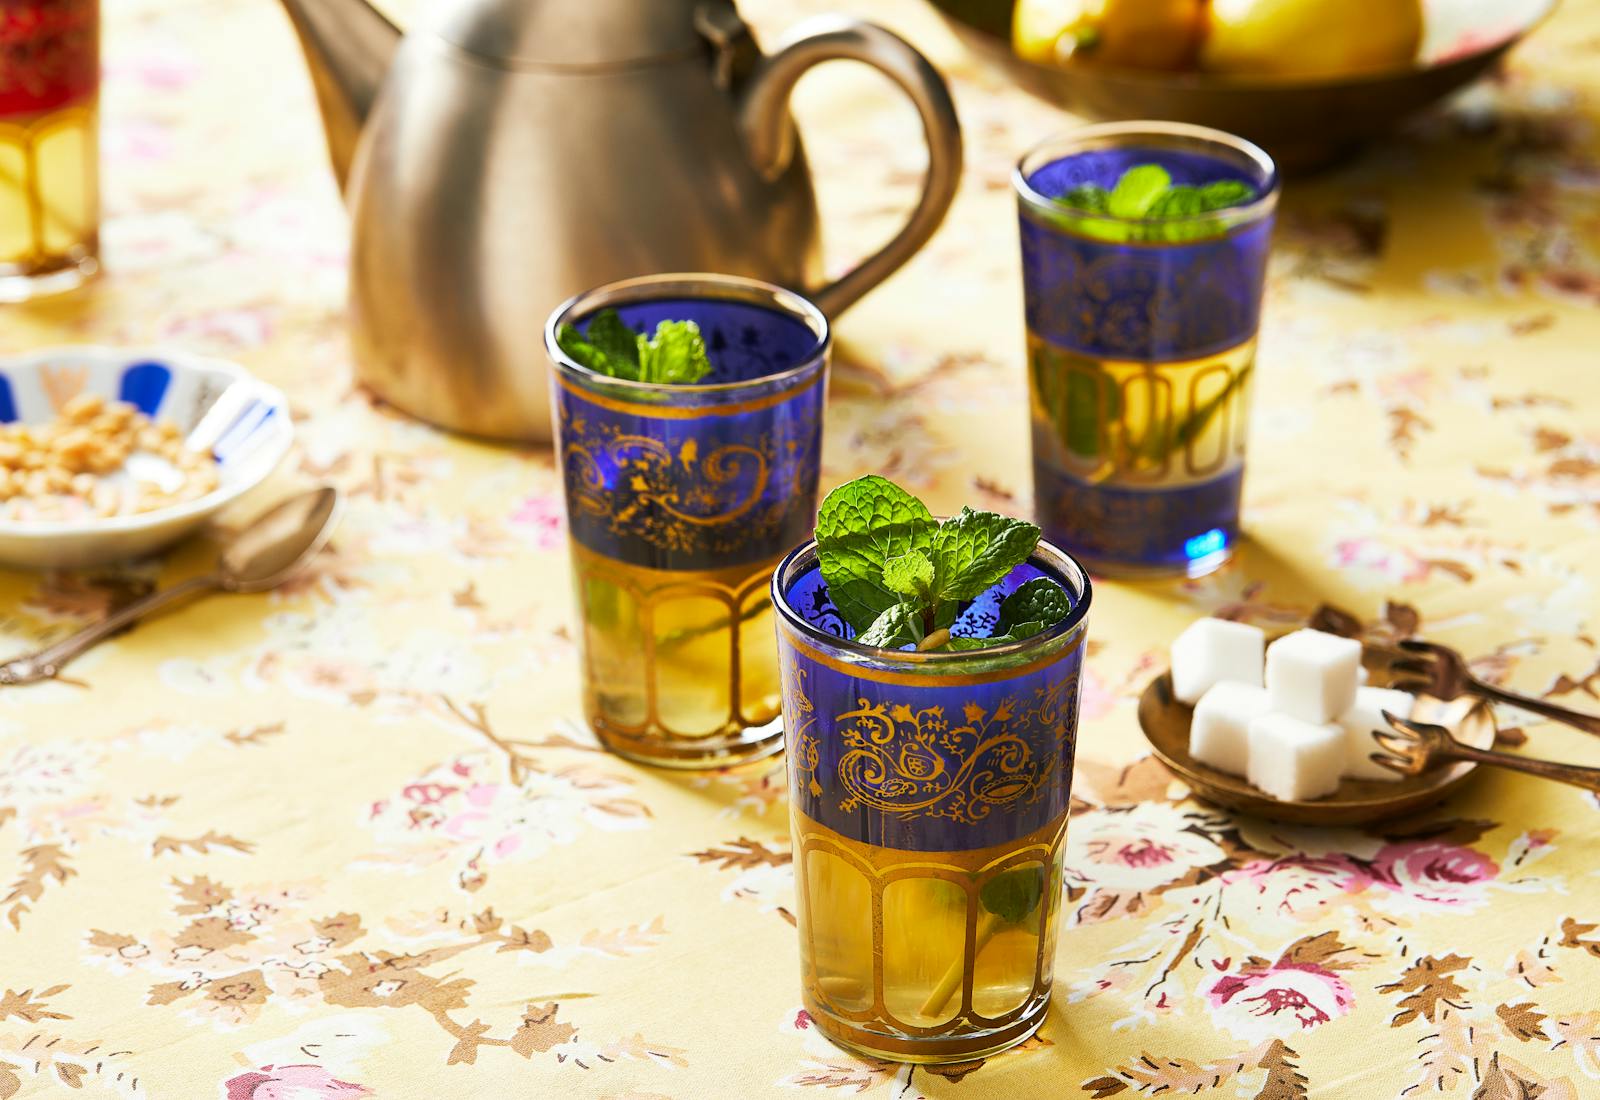 3 cups of mint tea garnished with fresh mint, sugar cubes on the side, silver teapot in the background, served over yellow floral tablecloth.